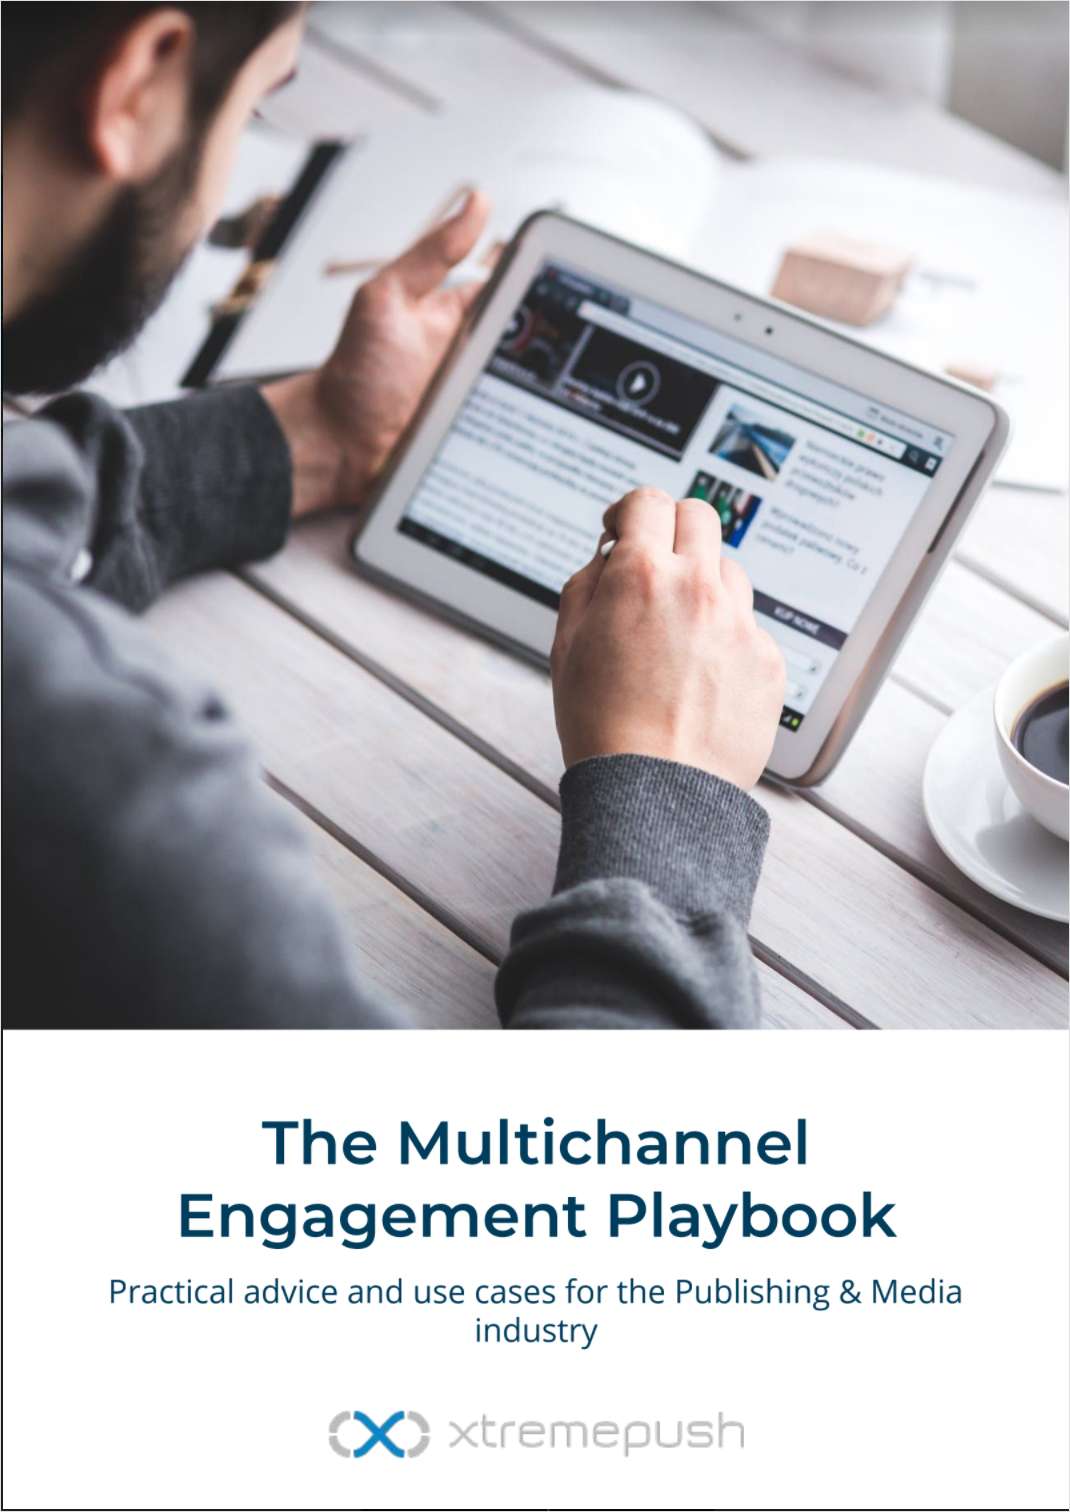 Multichannel Engagement in the Publishing & Media Industry